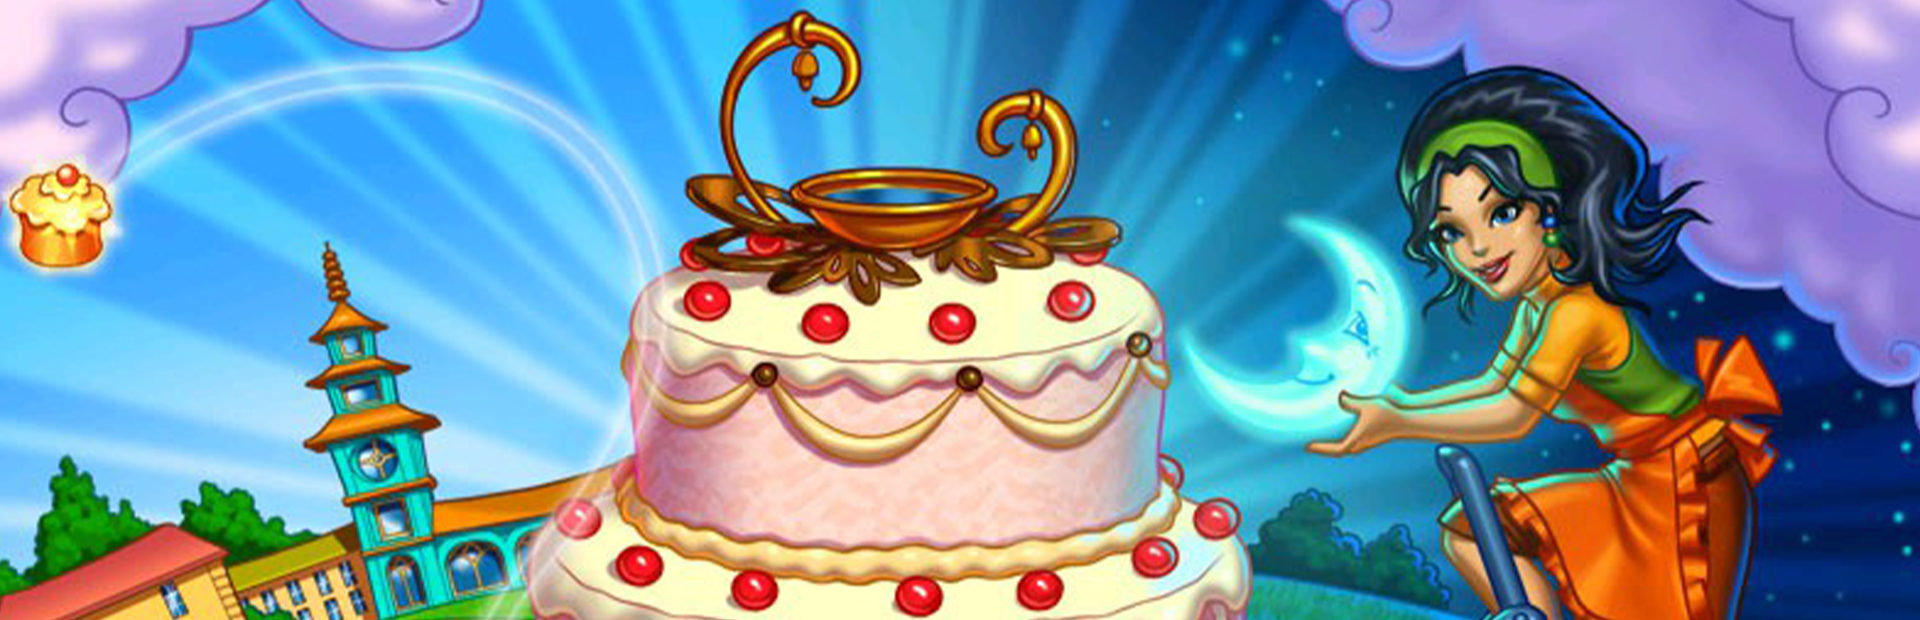 How to Download and Play Cake Mania 4: Main Street for Free | Spokesperson  - Independent blogging platform